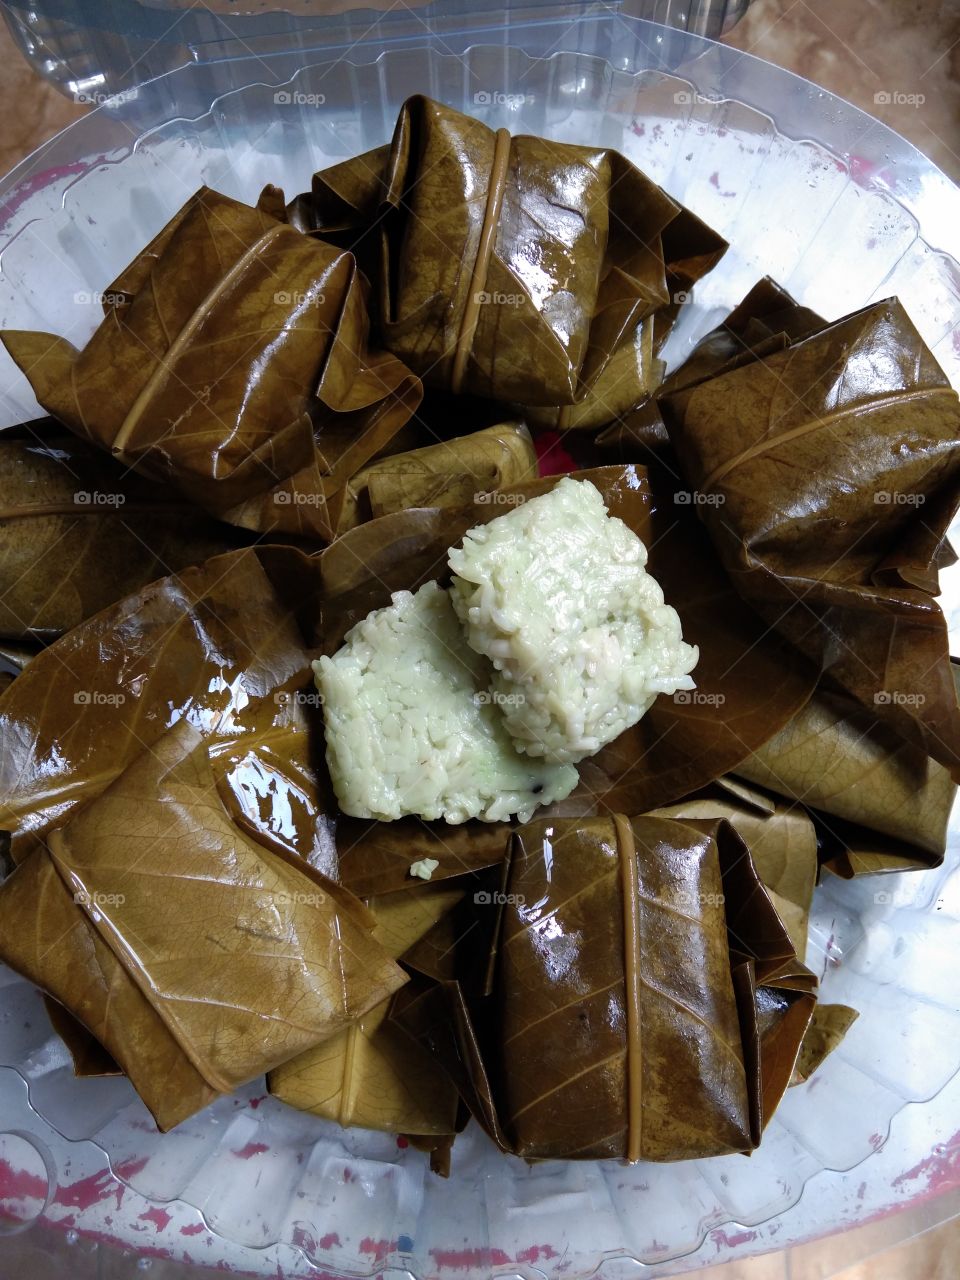 traditional sticky rice tape wrapped in guava leaves